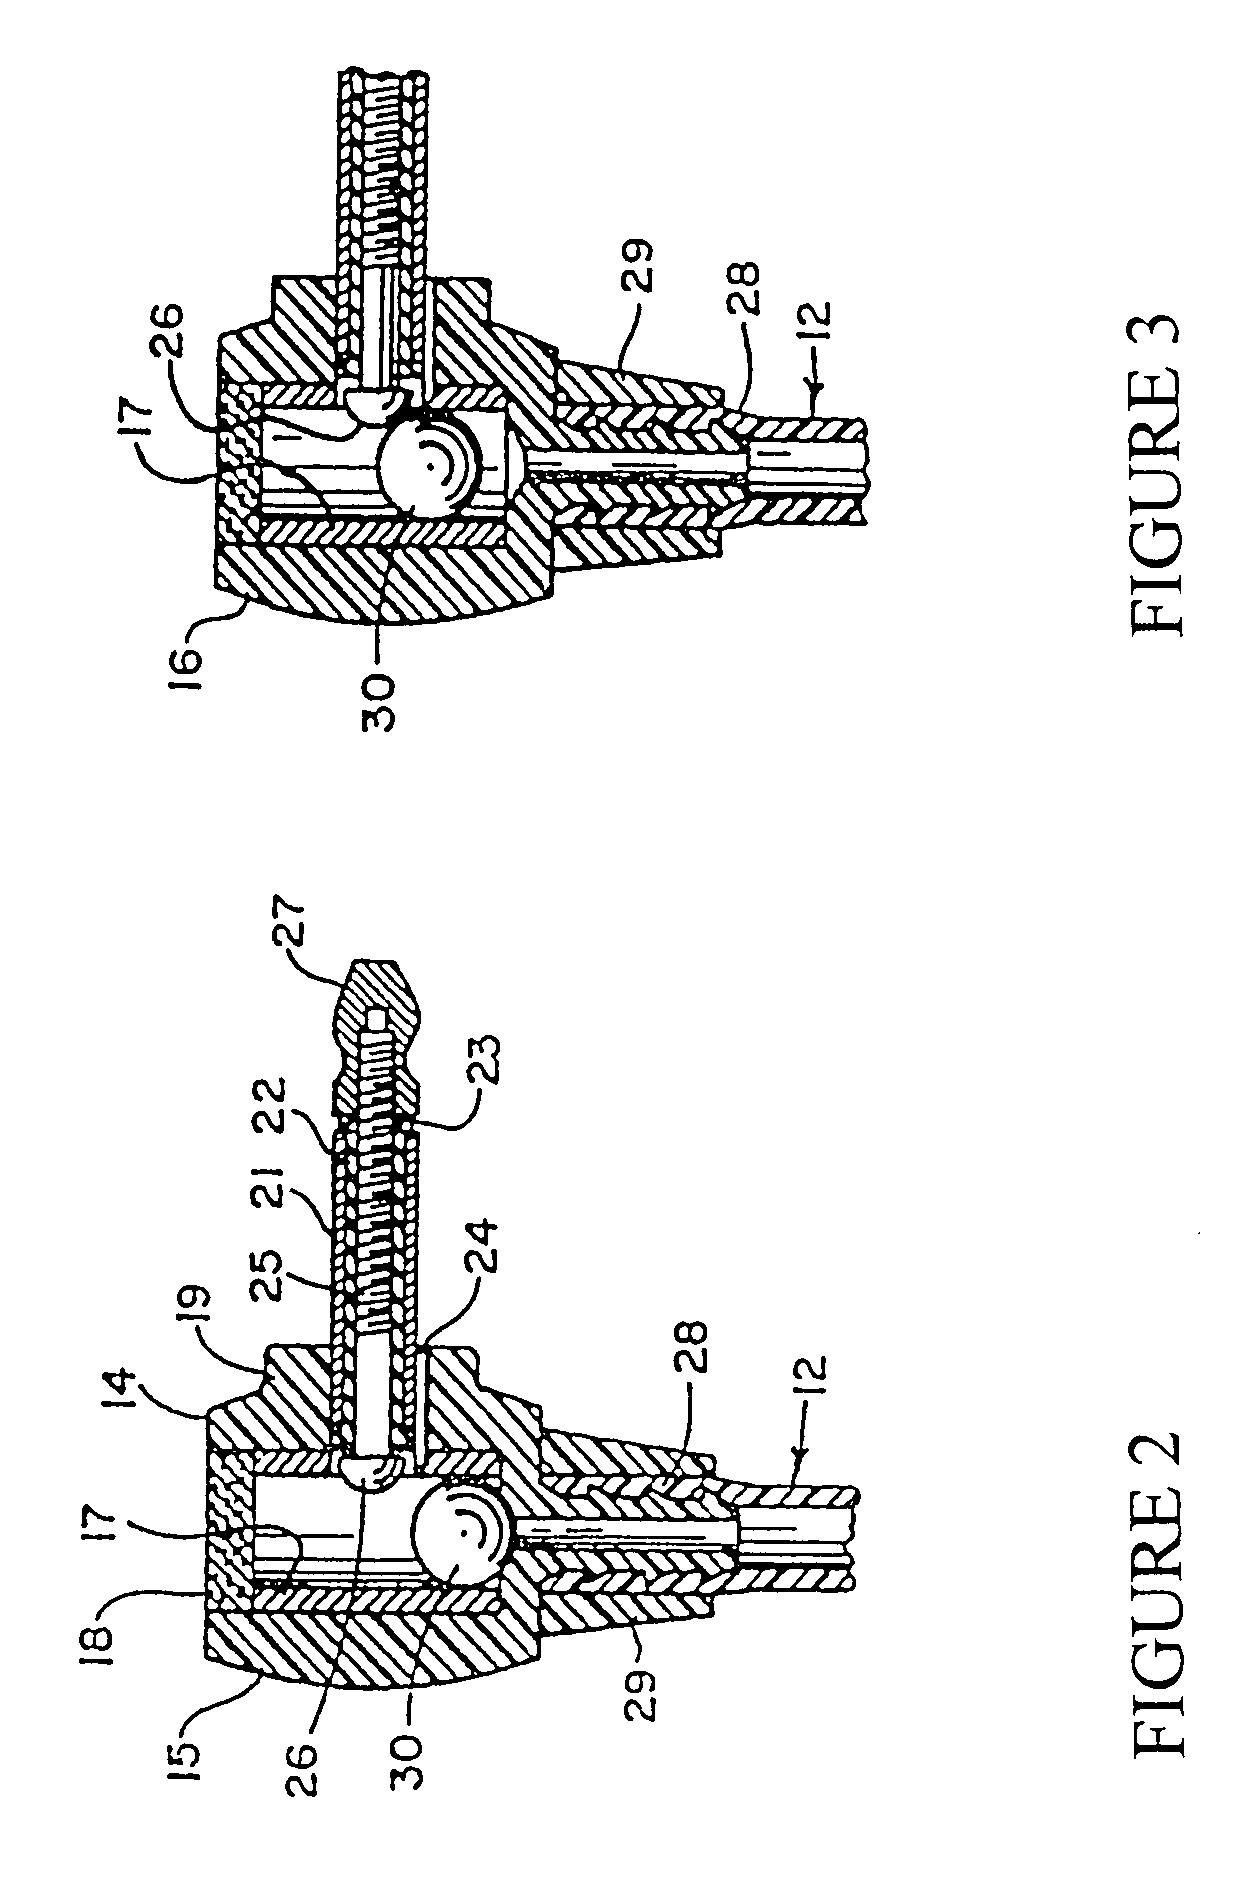 Elliptical pneumatic actuator with a wedge shaped base